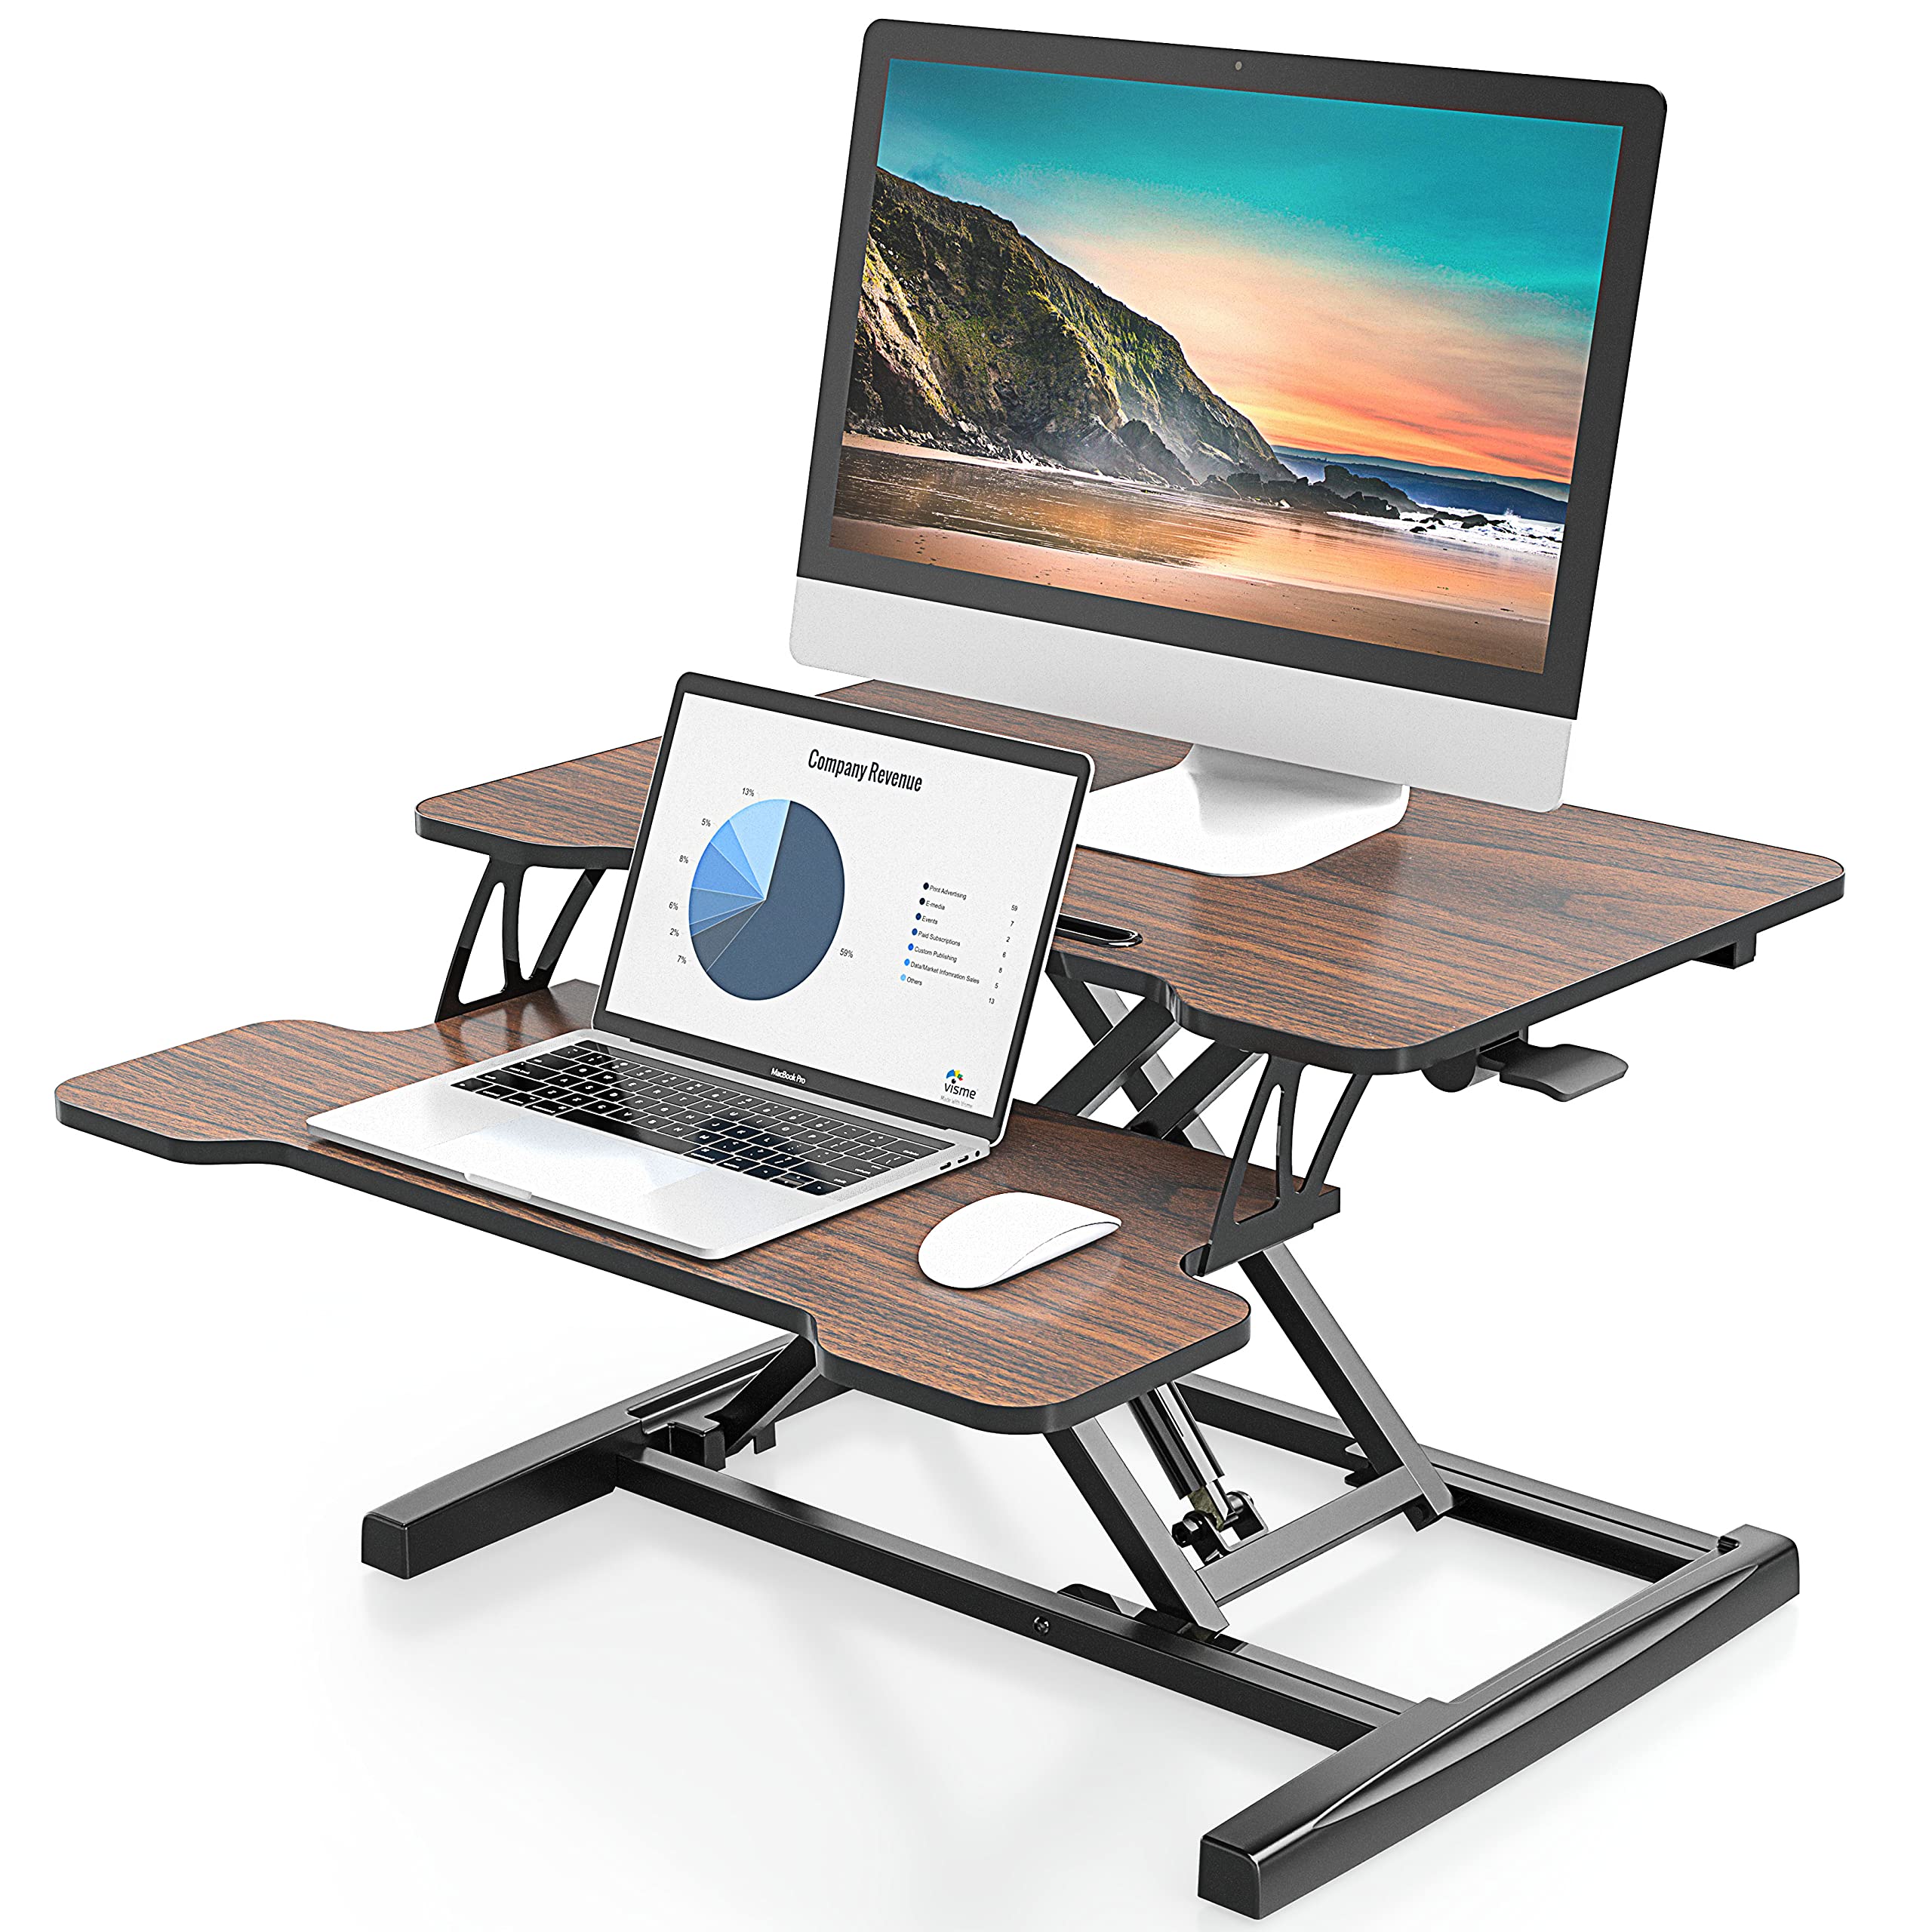 FITUEYES Stand Up Desk Standing Desk Converter Riser Adjustable Office Desk for Laptop with Deep Removable Keyboard Tray Dark Brown SD260002WE